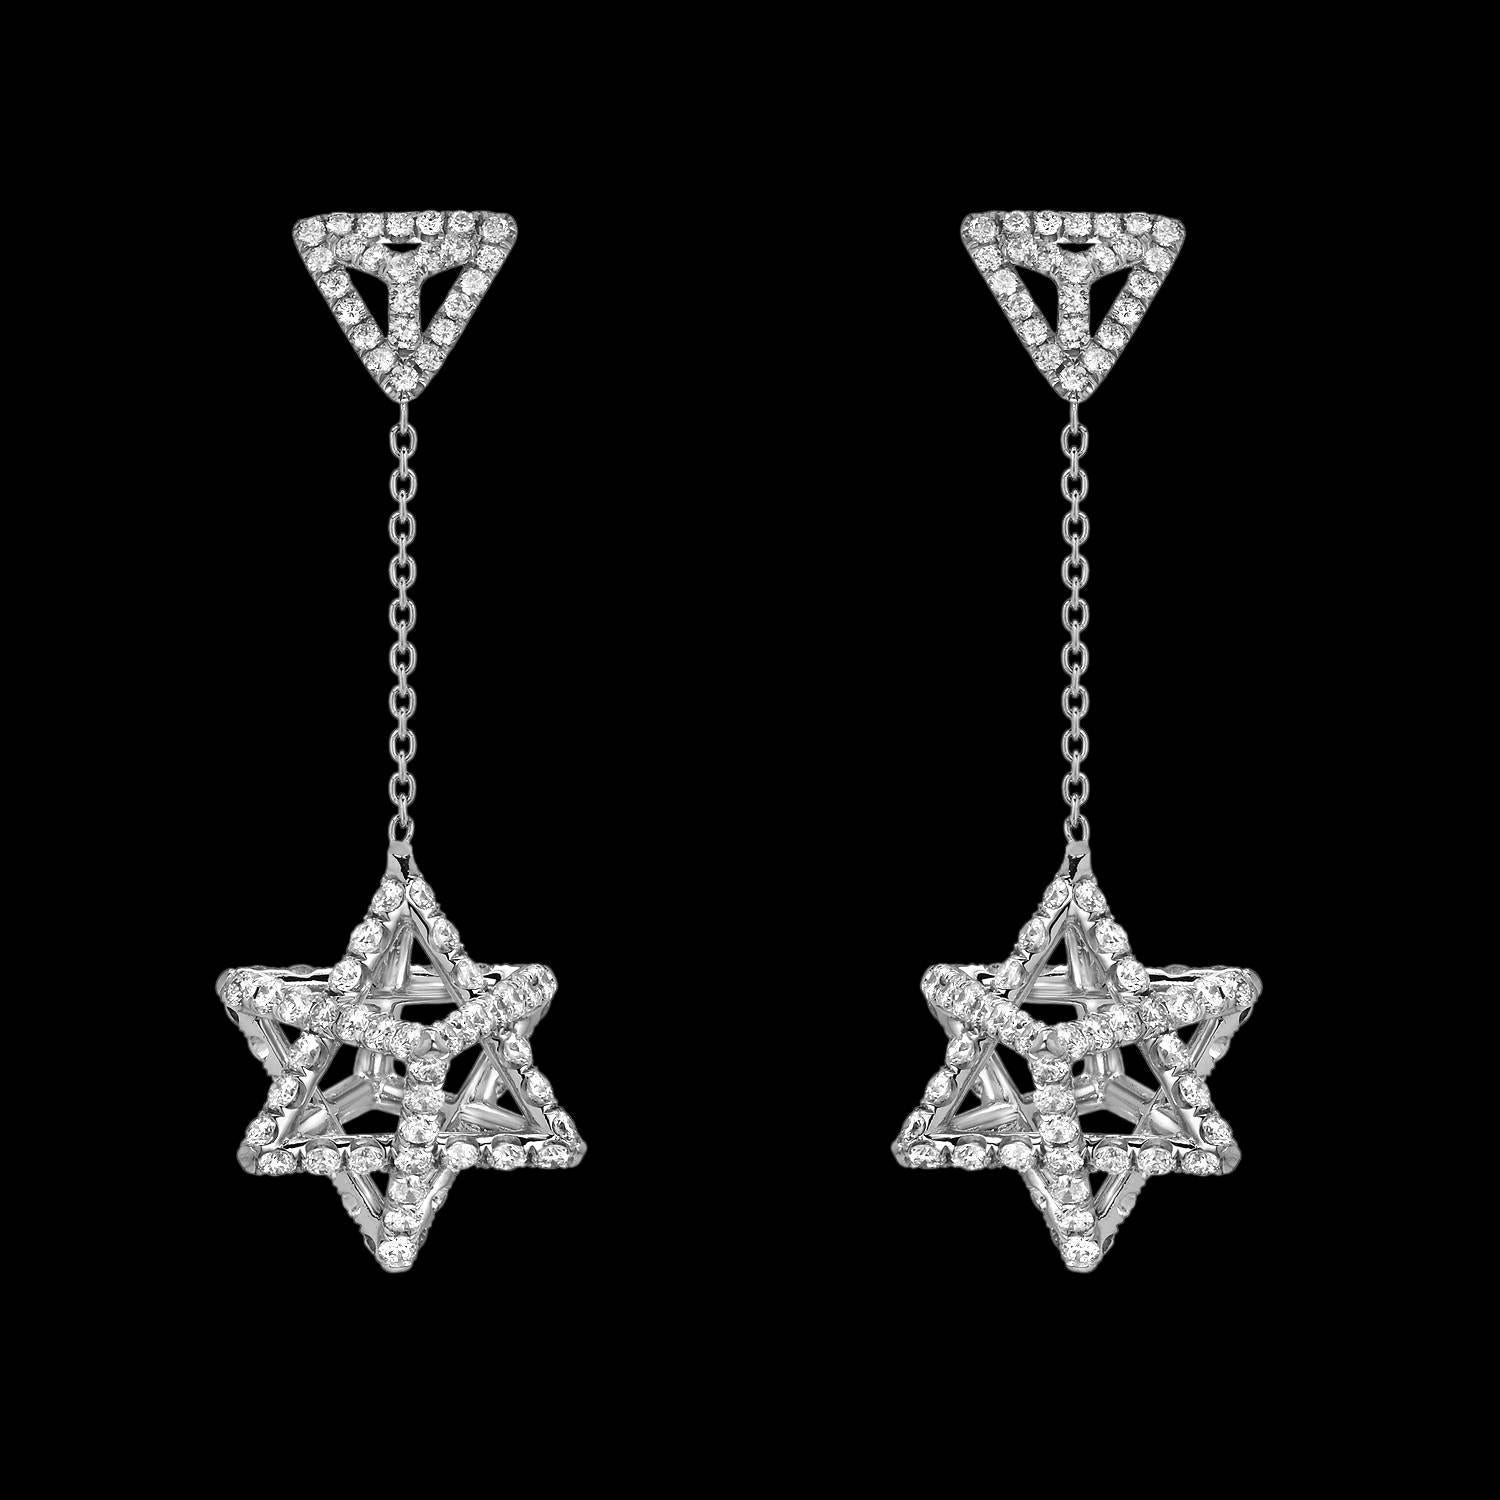 Delicate Merkaba platinum drop earrings, tethered by a triangle stud, feature a single chain suspending a Merkaba star measuring 0.57 inches. Secure screw or La Pousette ear backs mirror the triangle motif. Set with a total of approximately 2.39